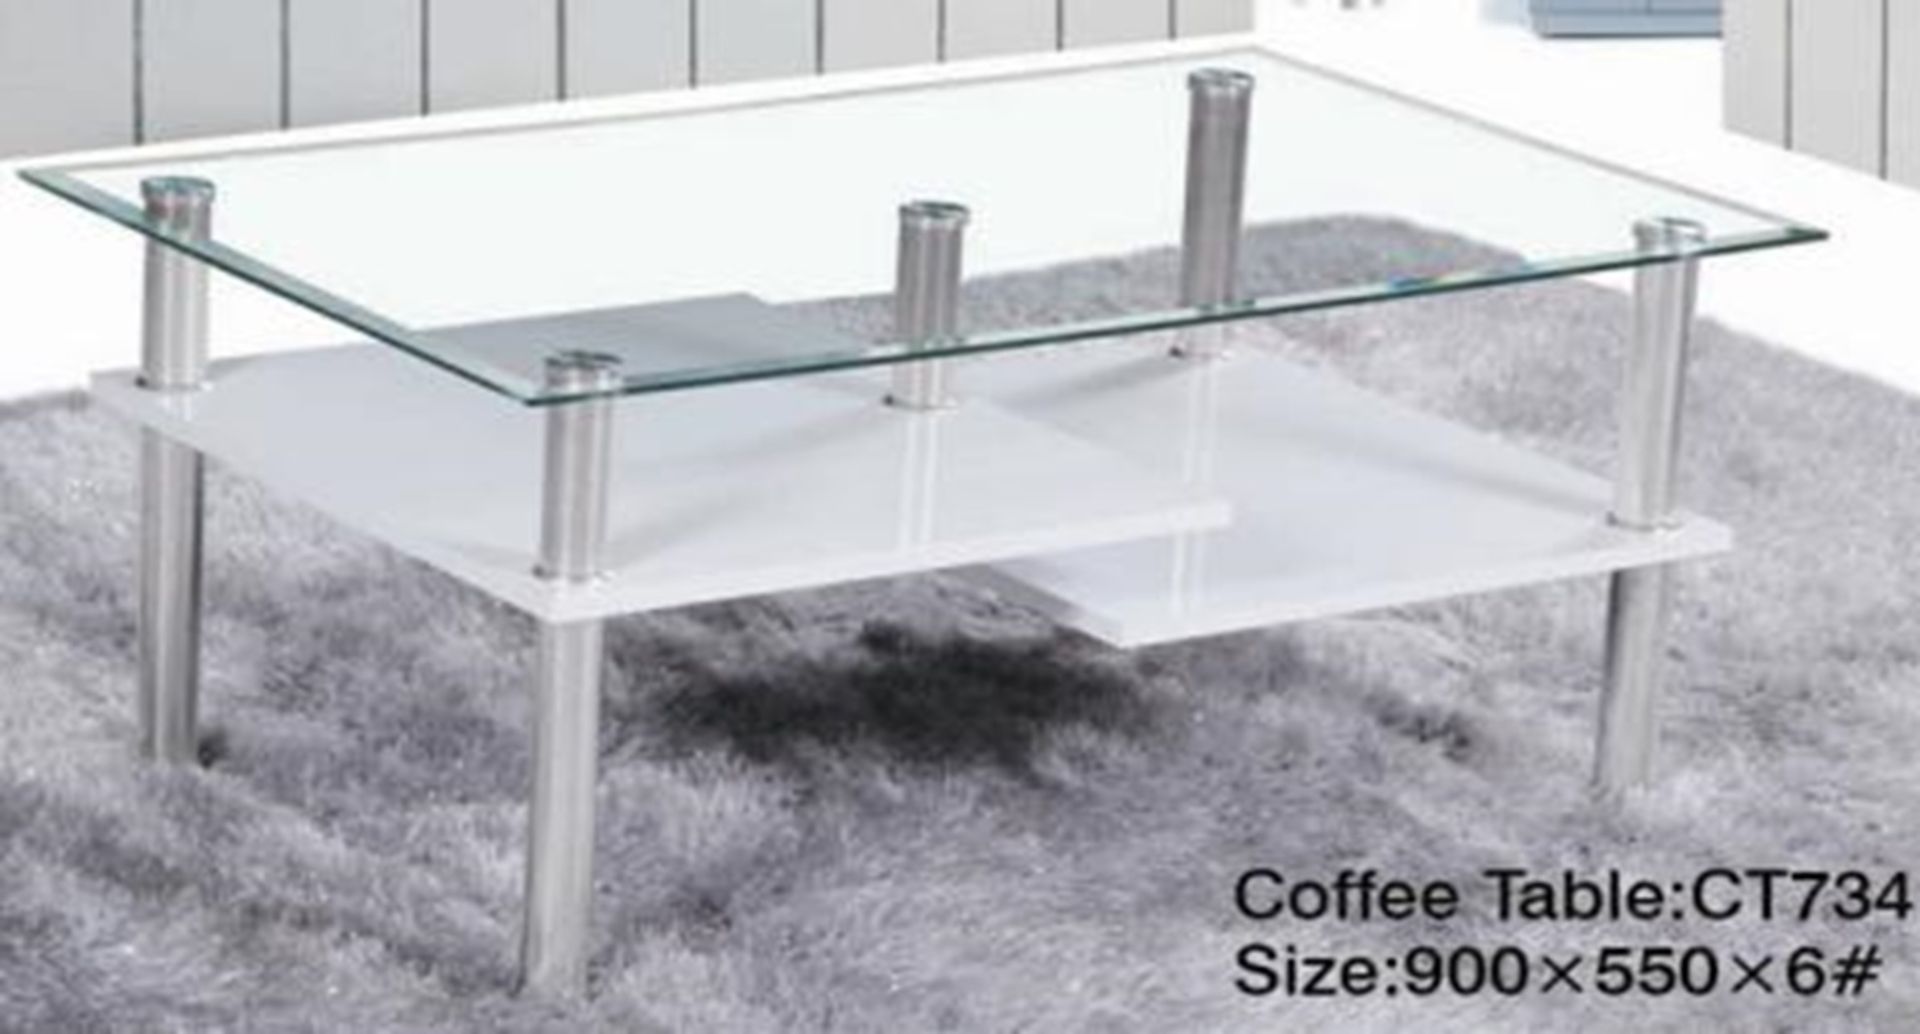 1 BRAND NEW BOXED HOMESTUFF PLUS RECTANGULAR CLEAR GLASS AND BLACK 3 TIER COFFEE TABLE CT734